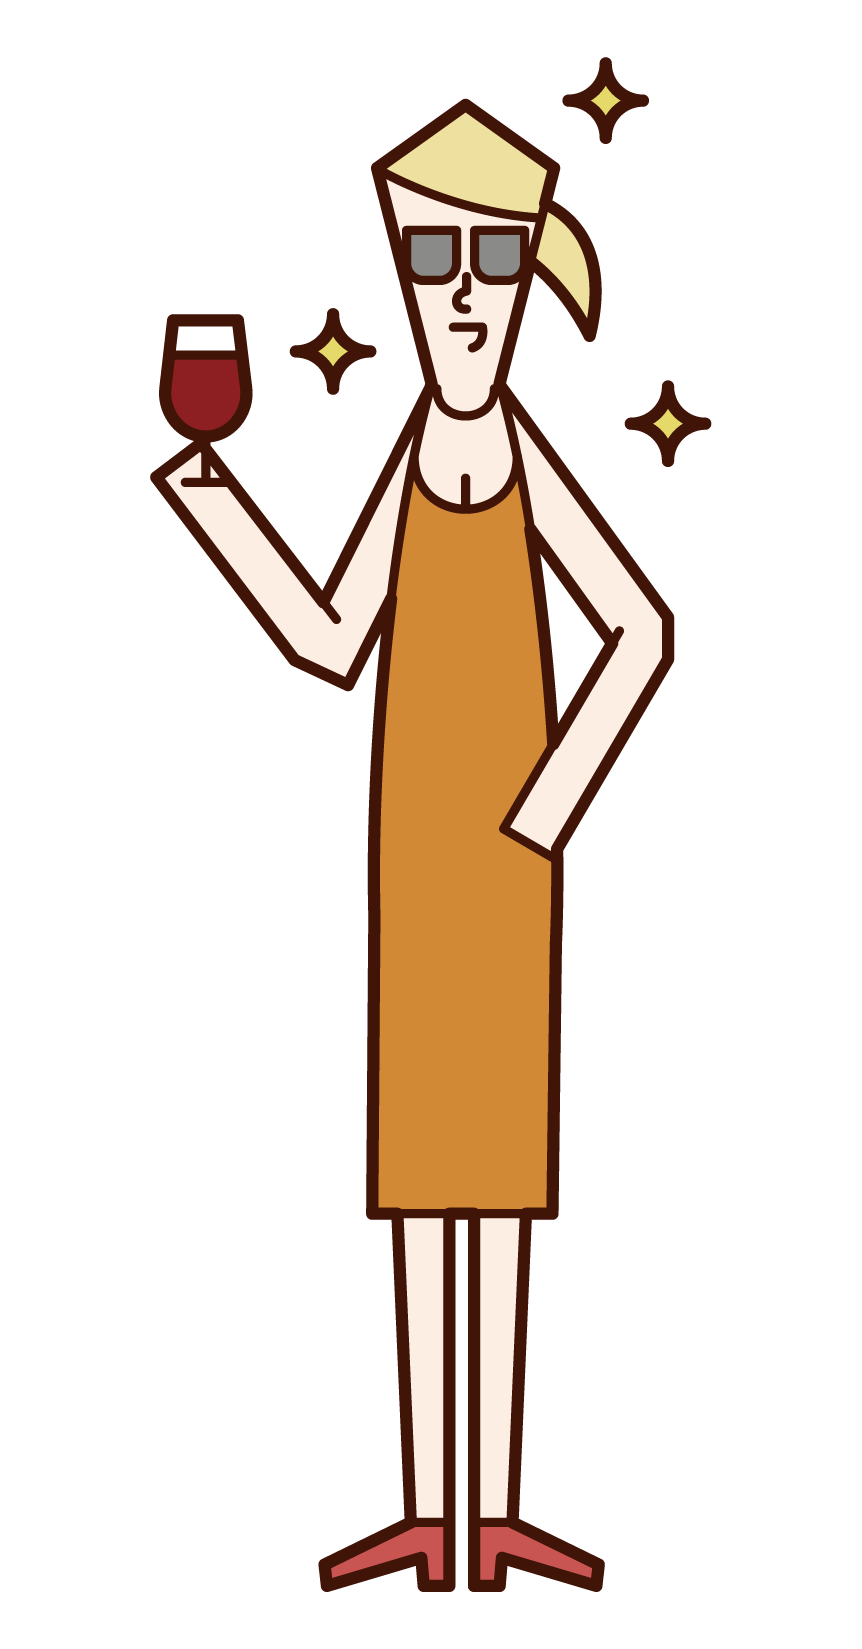 Illustration of a celebrity (woman) drinking wine